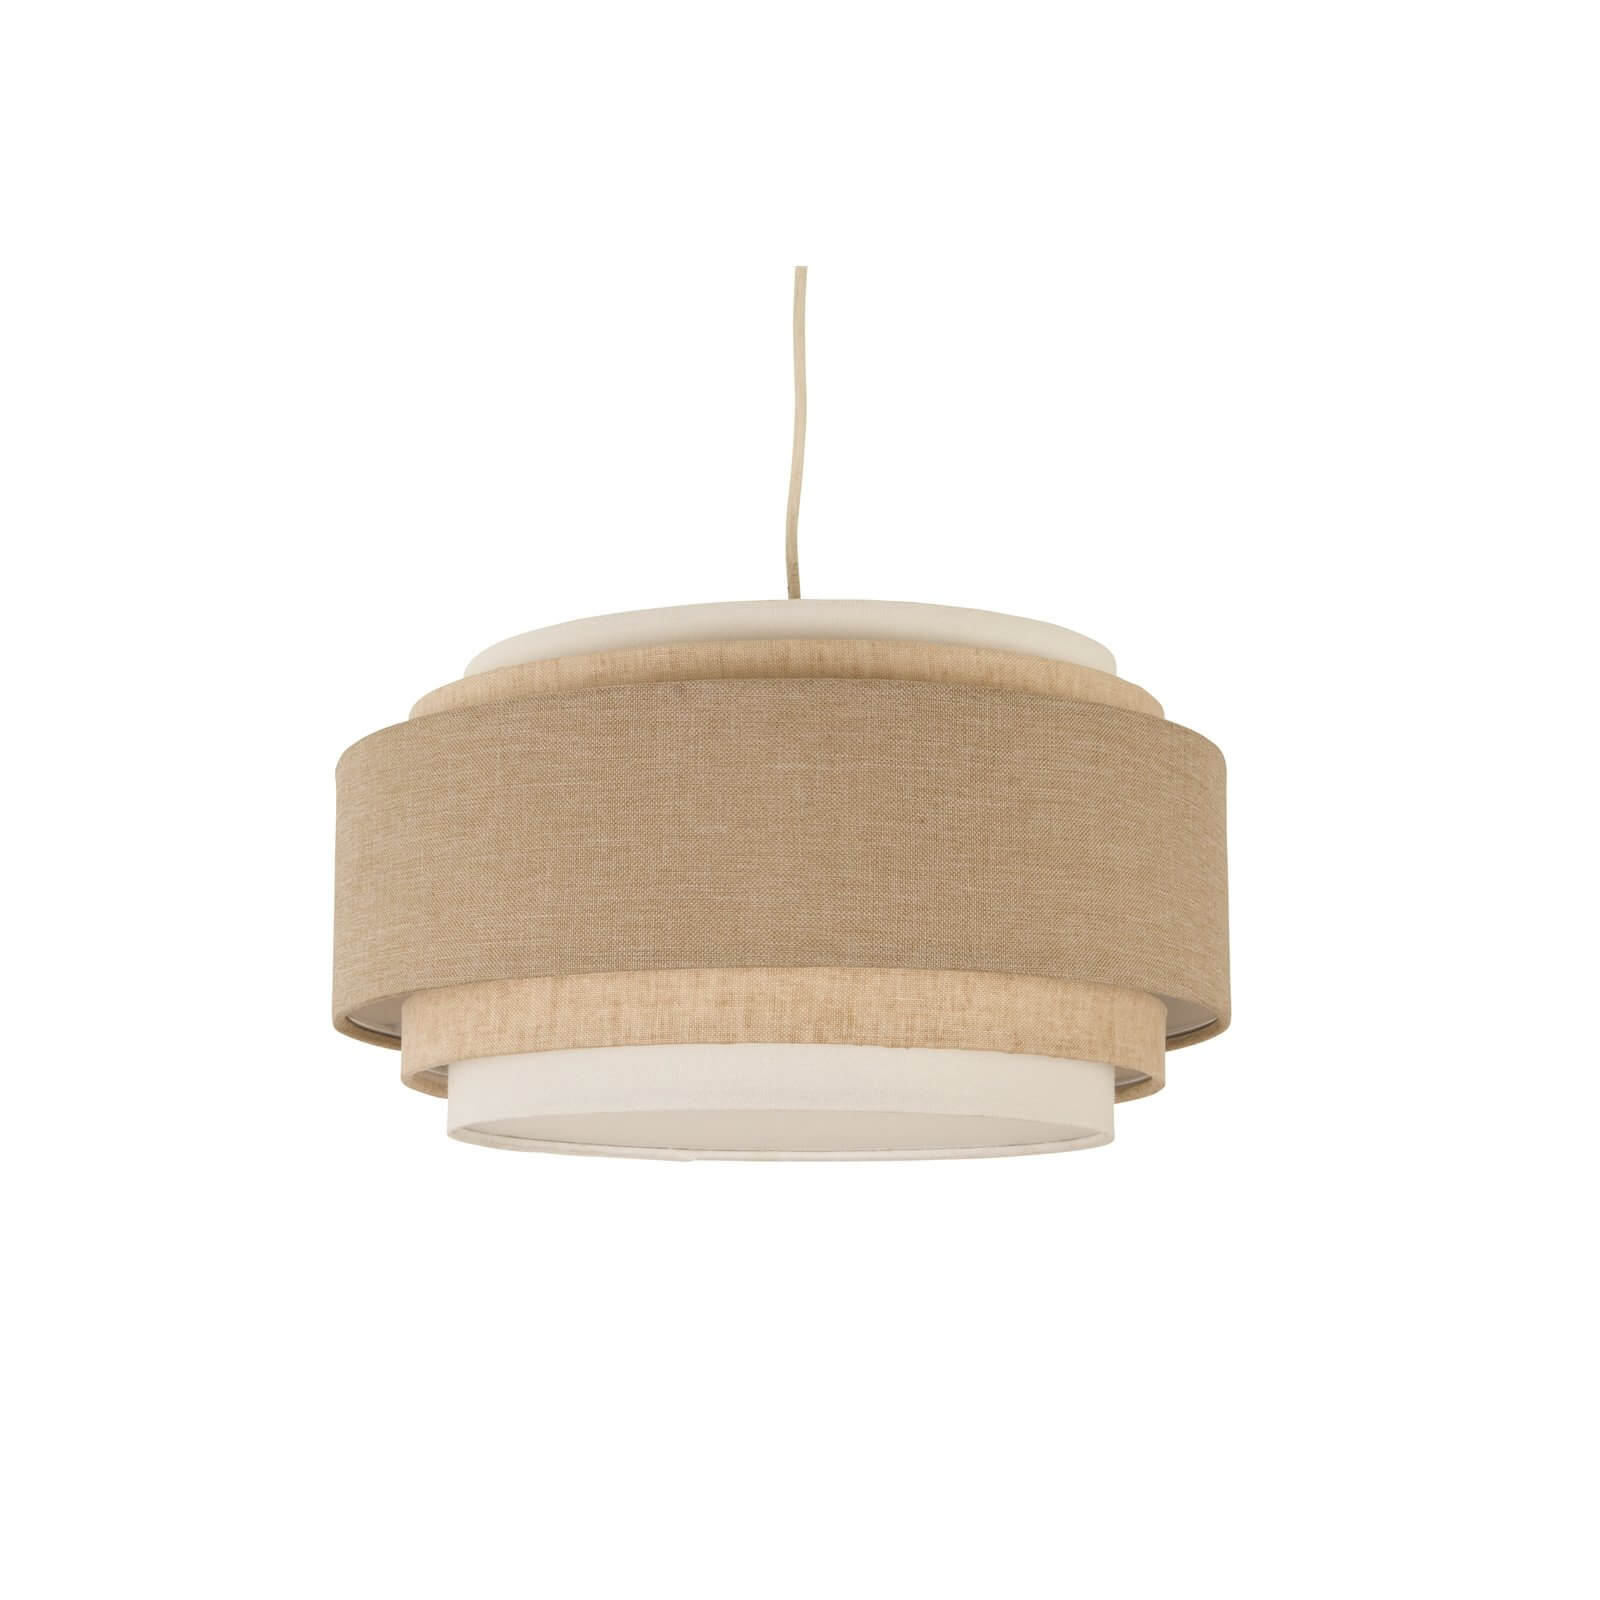 Sienna 5 Tier Easy Fit Pendant Lamp Shade - Natural